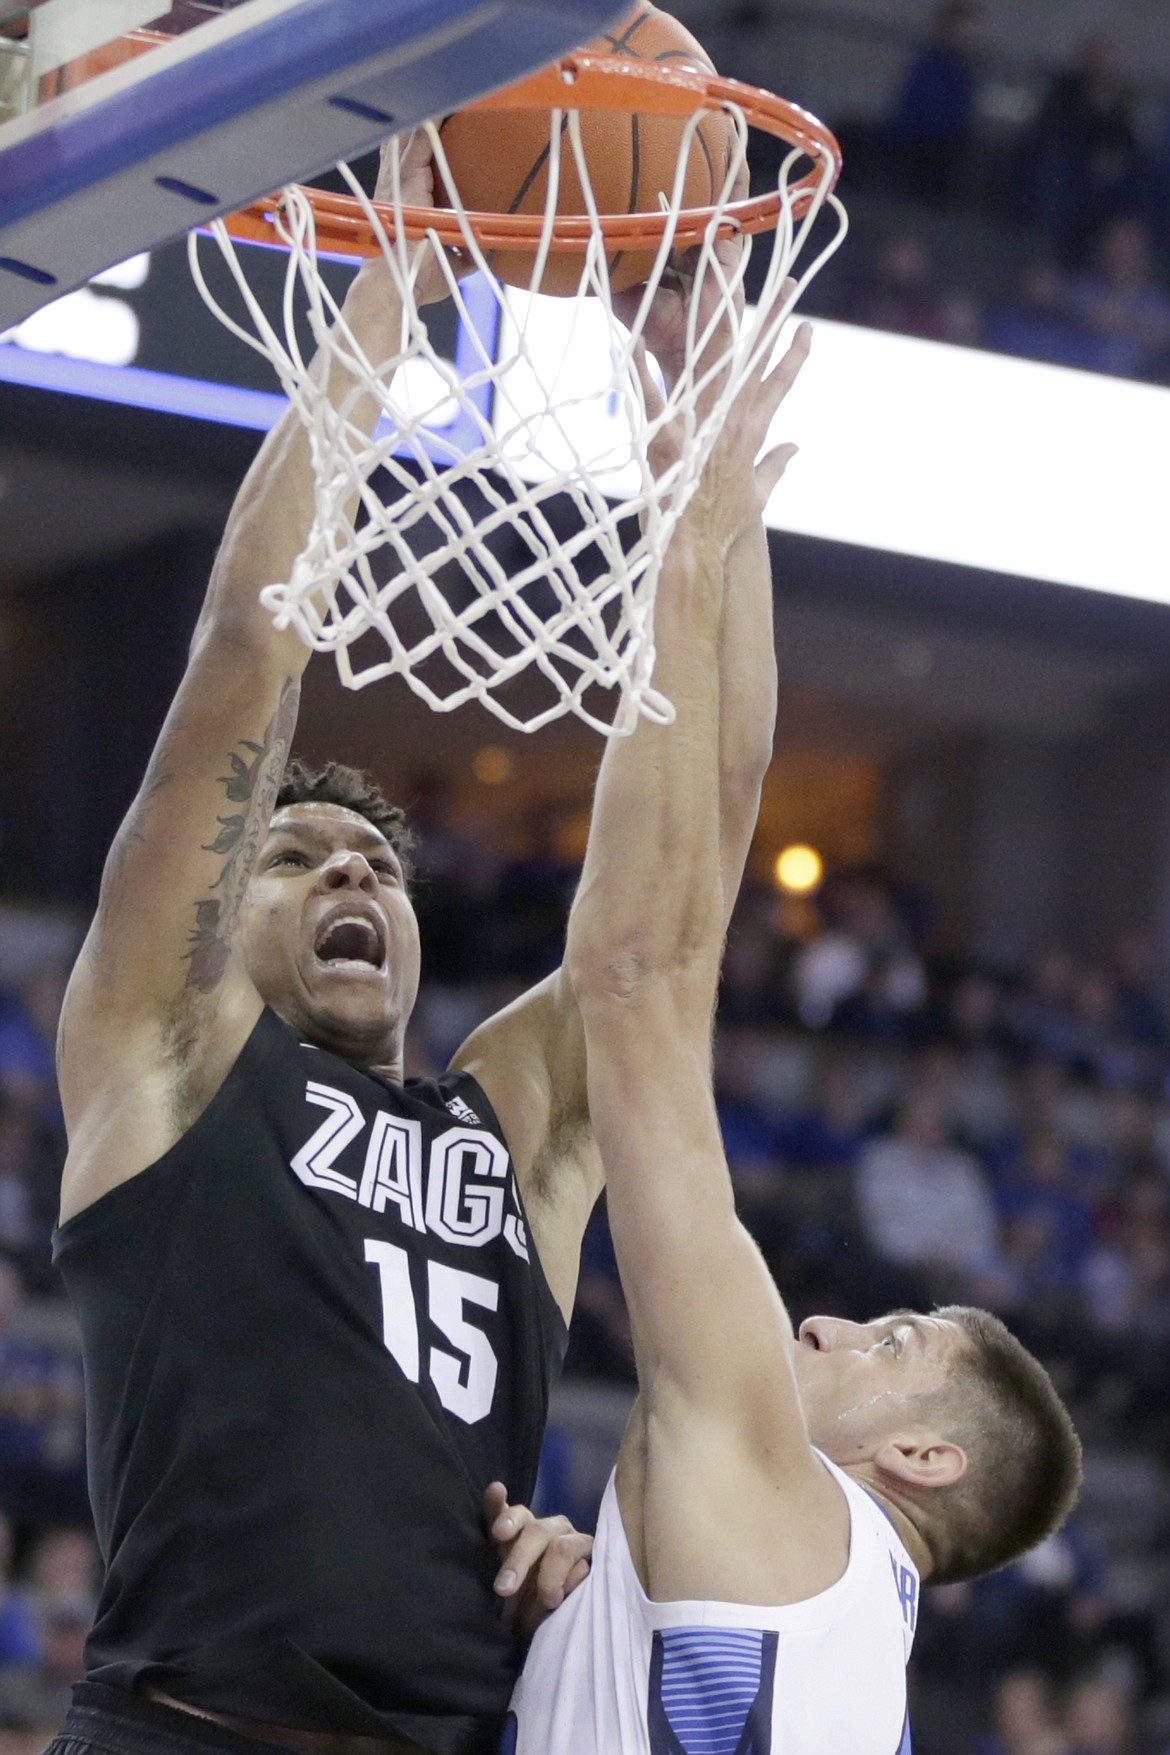 Gonzaga&#146;s Brandon Clarke (15) is fouled by Creighton&#146;s Martin&#160;Krampelj, right, during the first half of an NCAA college basketball game in Omaha, Neb., Saturday, Dec. 1, 2018. (AP Photo/Nati Harnik)